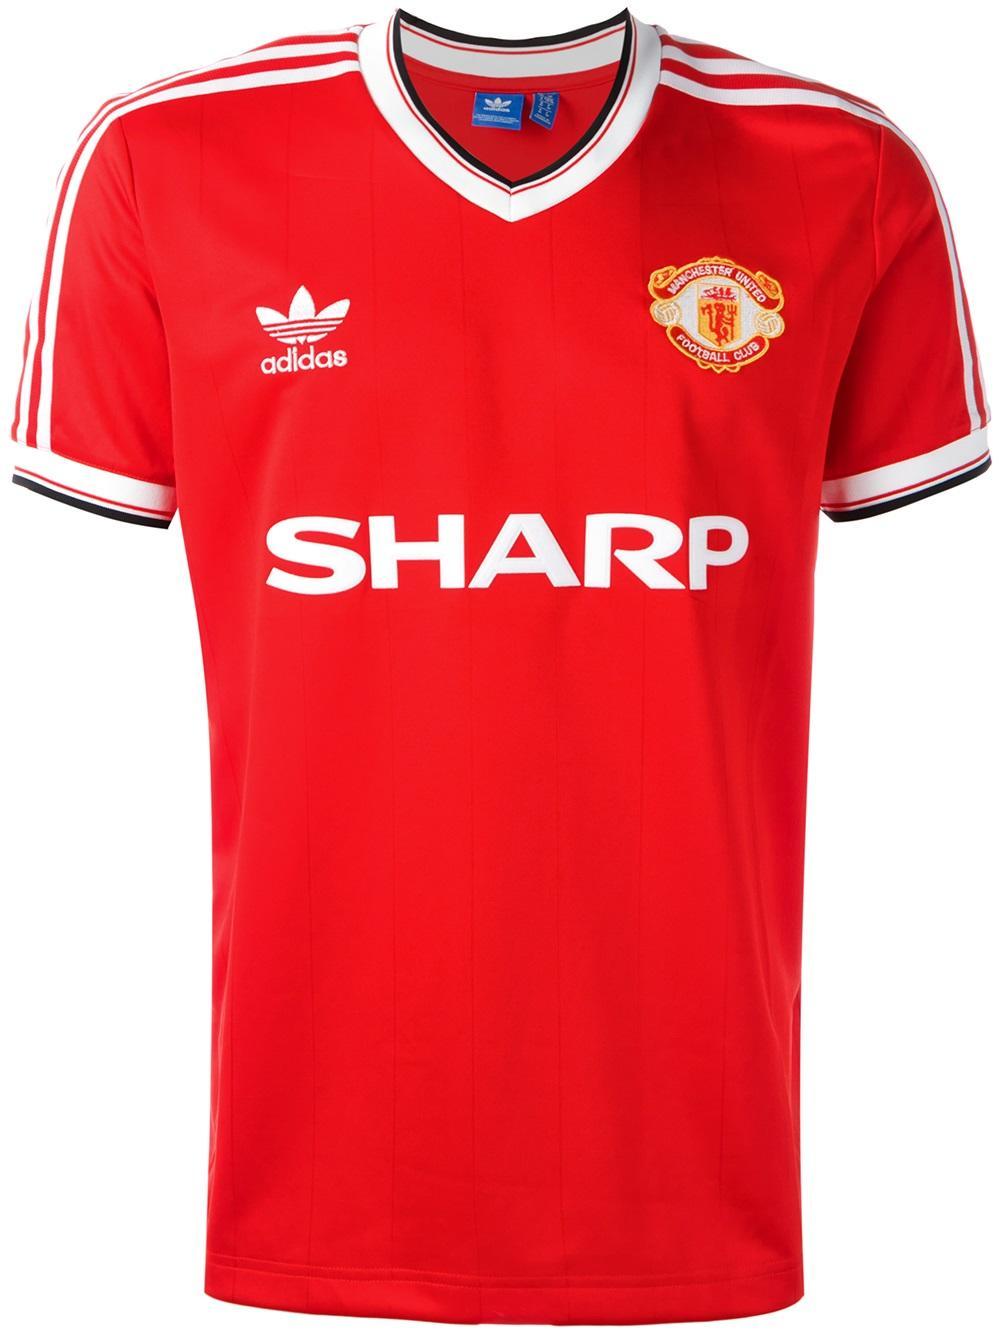 adidas Originals Manchester United Fc Home Jersey T-shirt in Red for